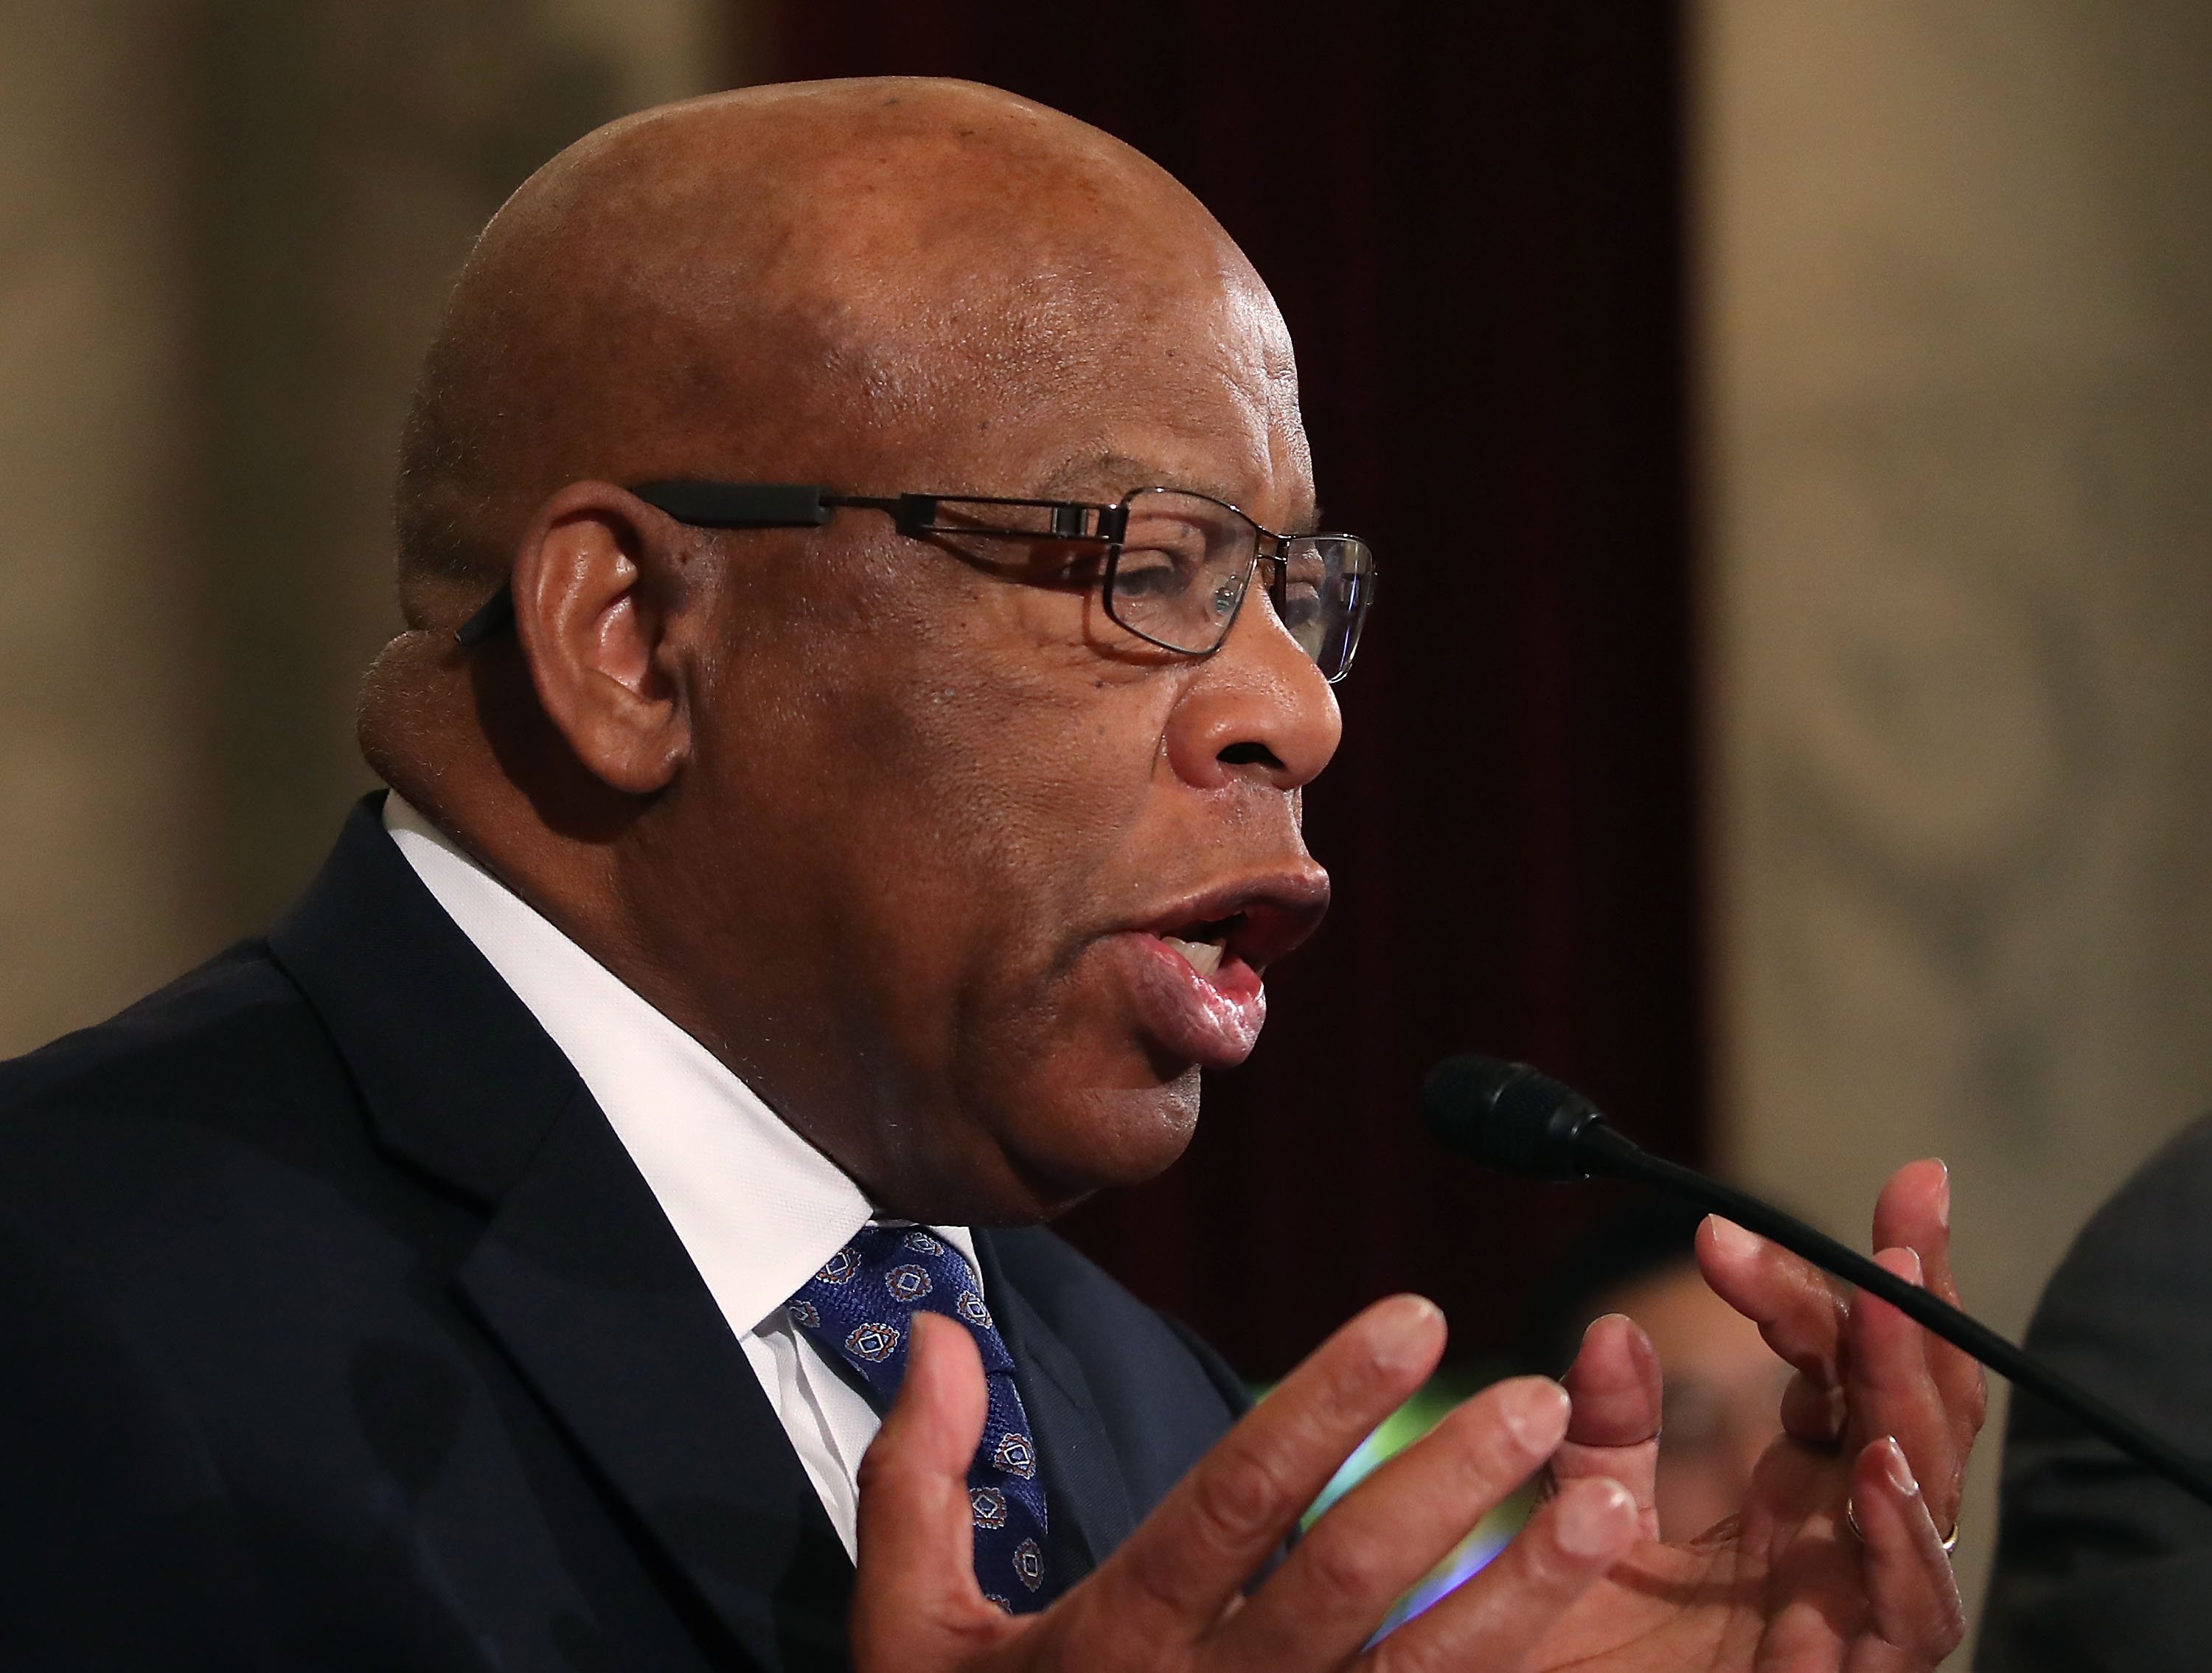 Rep. John Lewis, reads a statement speaking out against Attorney General nominee Jeff Sessions, during a Senate Judiciary Committee hearing on Capitol Hill, January 11, 2017 in Washington, DC. The committee is on its second day of the Sessions confirmation hearing. (Photo by Mark Wilson/Getty Images)